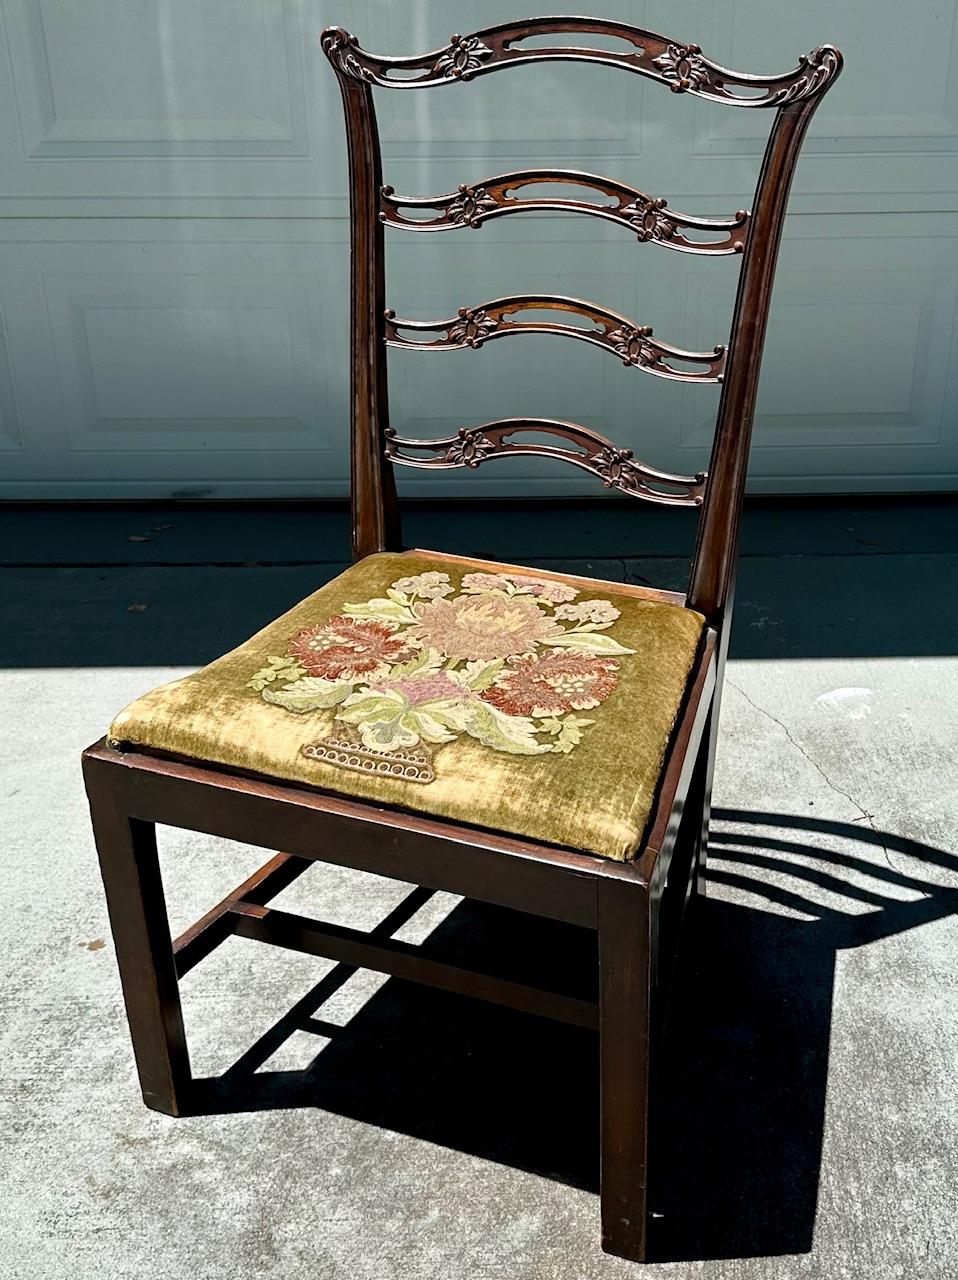 Chippendale Style Ladder Ribbon Back Embroidered Seat Side Chair

This is a superb mahogany, Chippendale ribbon-back side chair with embroidered seat.  Dating to the 19th Century, four interlacing horizontal pierced ribbon splats comprise the ladder